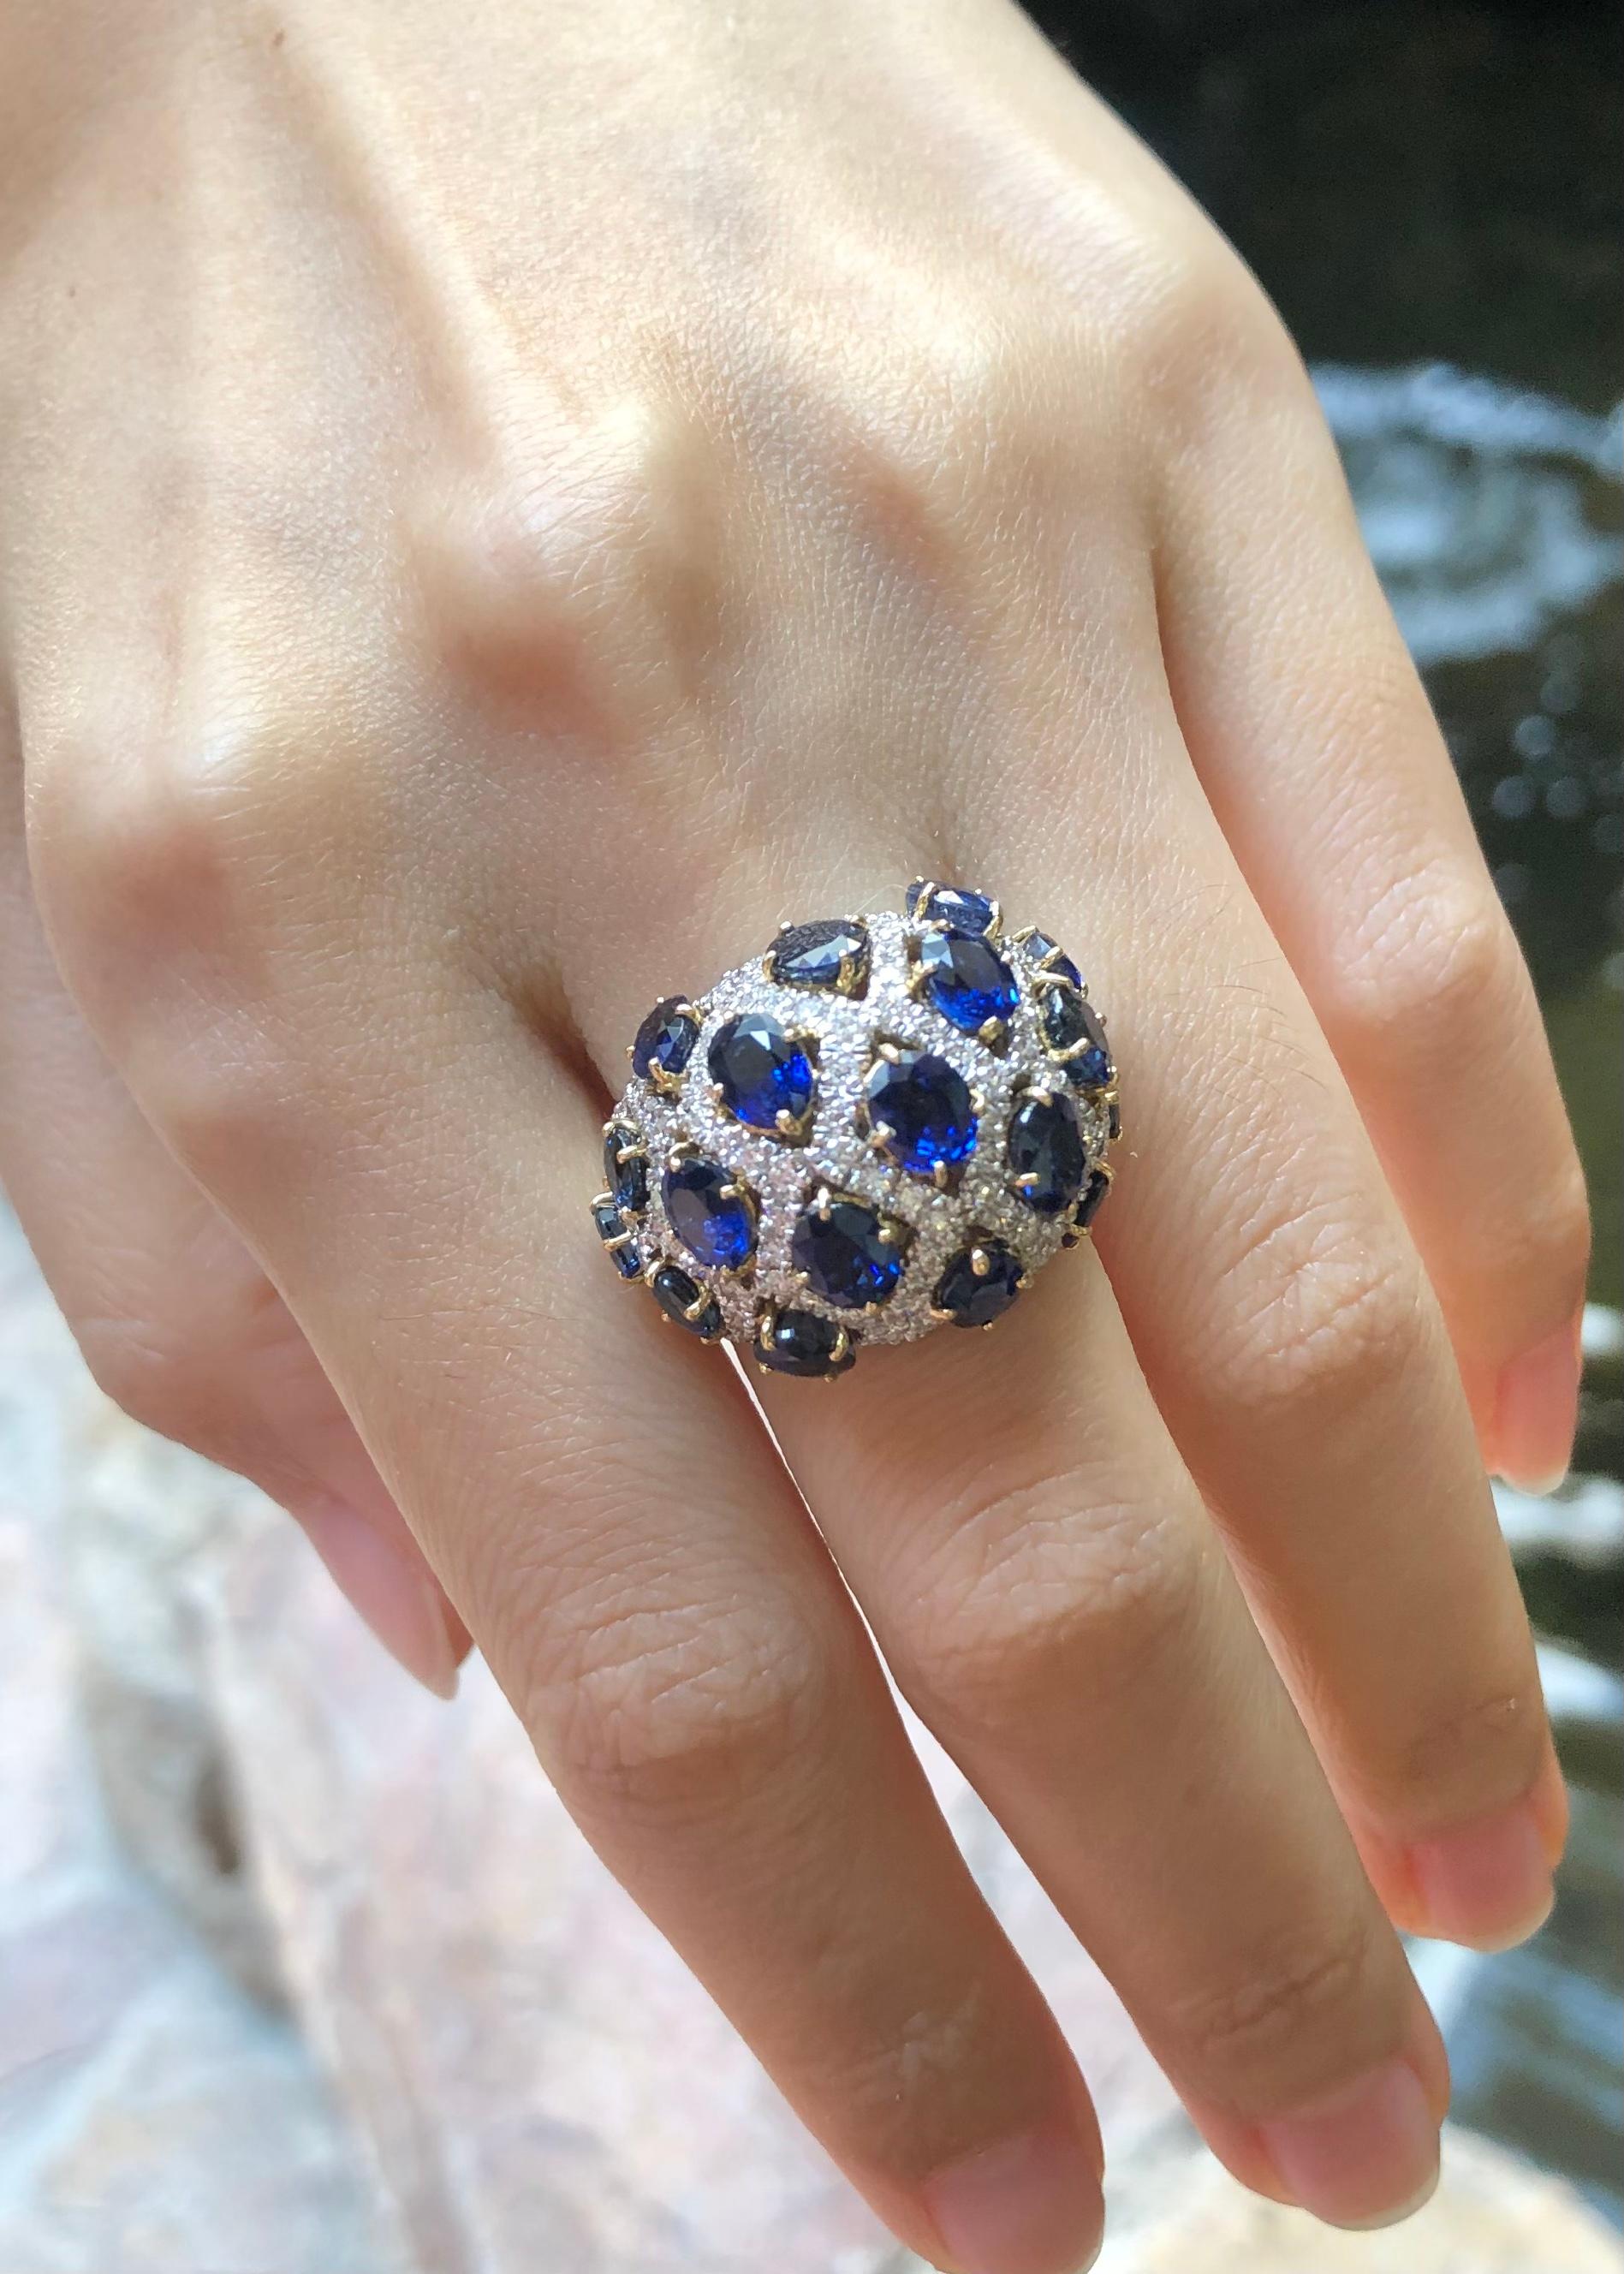 Blue Sapphire 8.53 carats with Diamond 1.62 carats Ring set in 18 Karat Gold Settings

Width: 2.5 cm 
Length: 2.0  cm
Ring Size: 52
Total Weight: 15.82 grams



